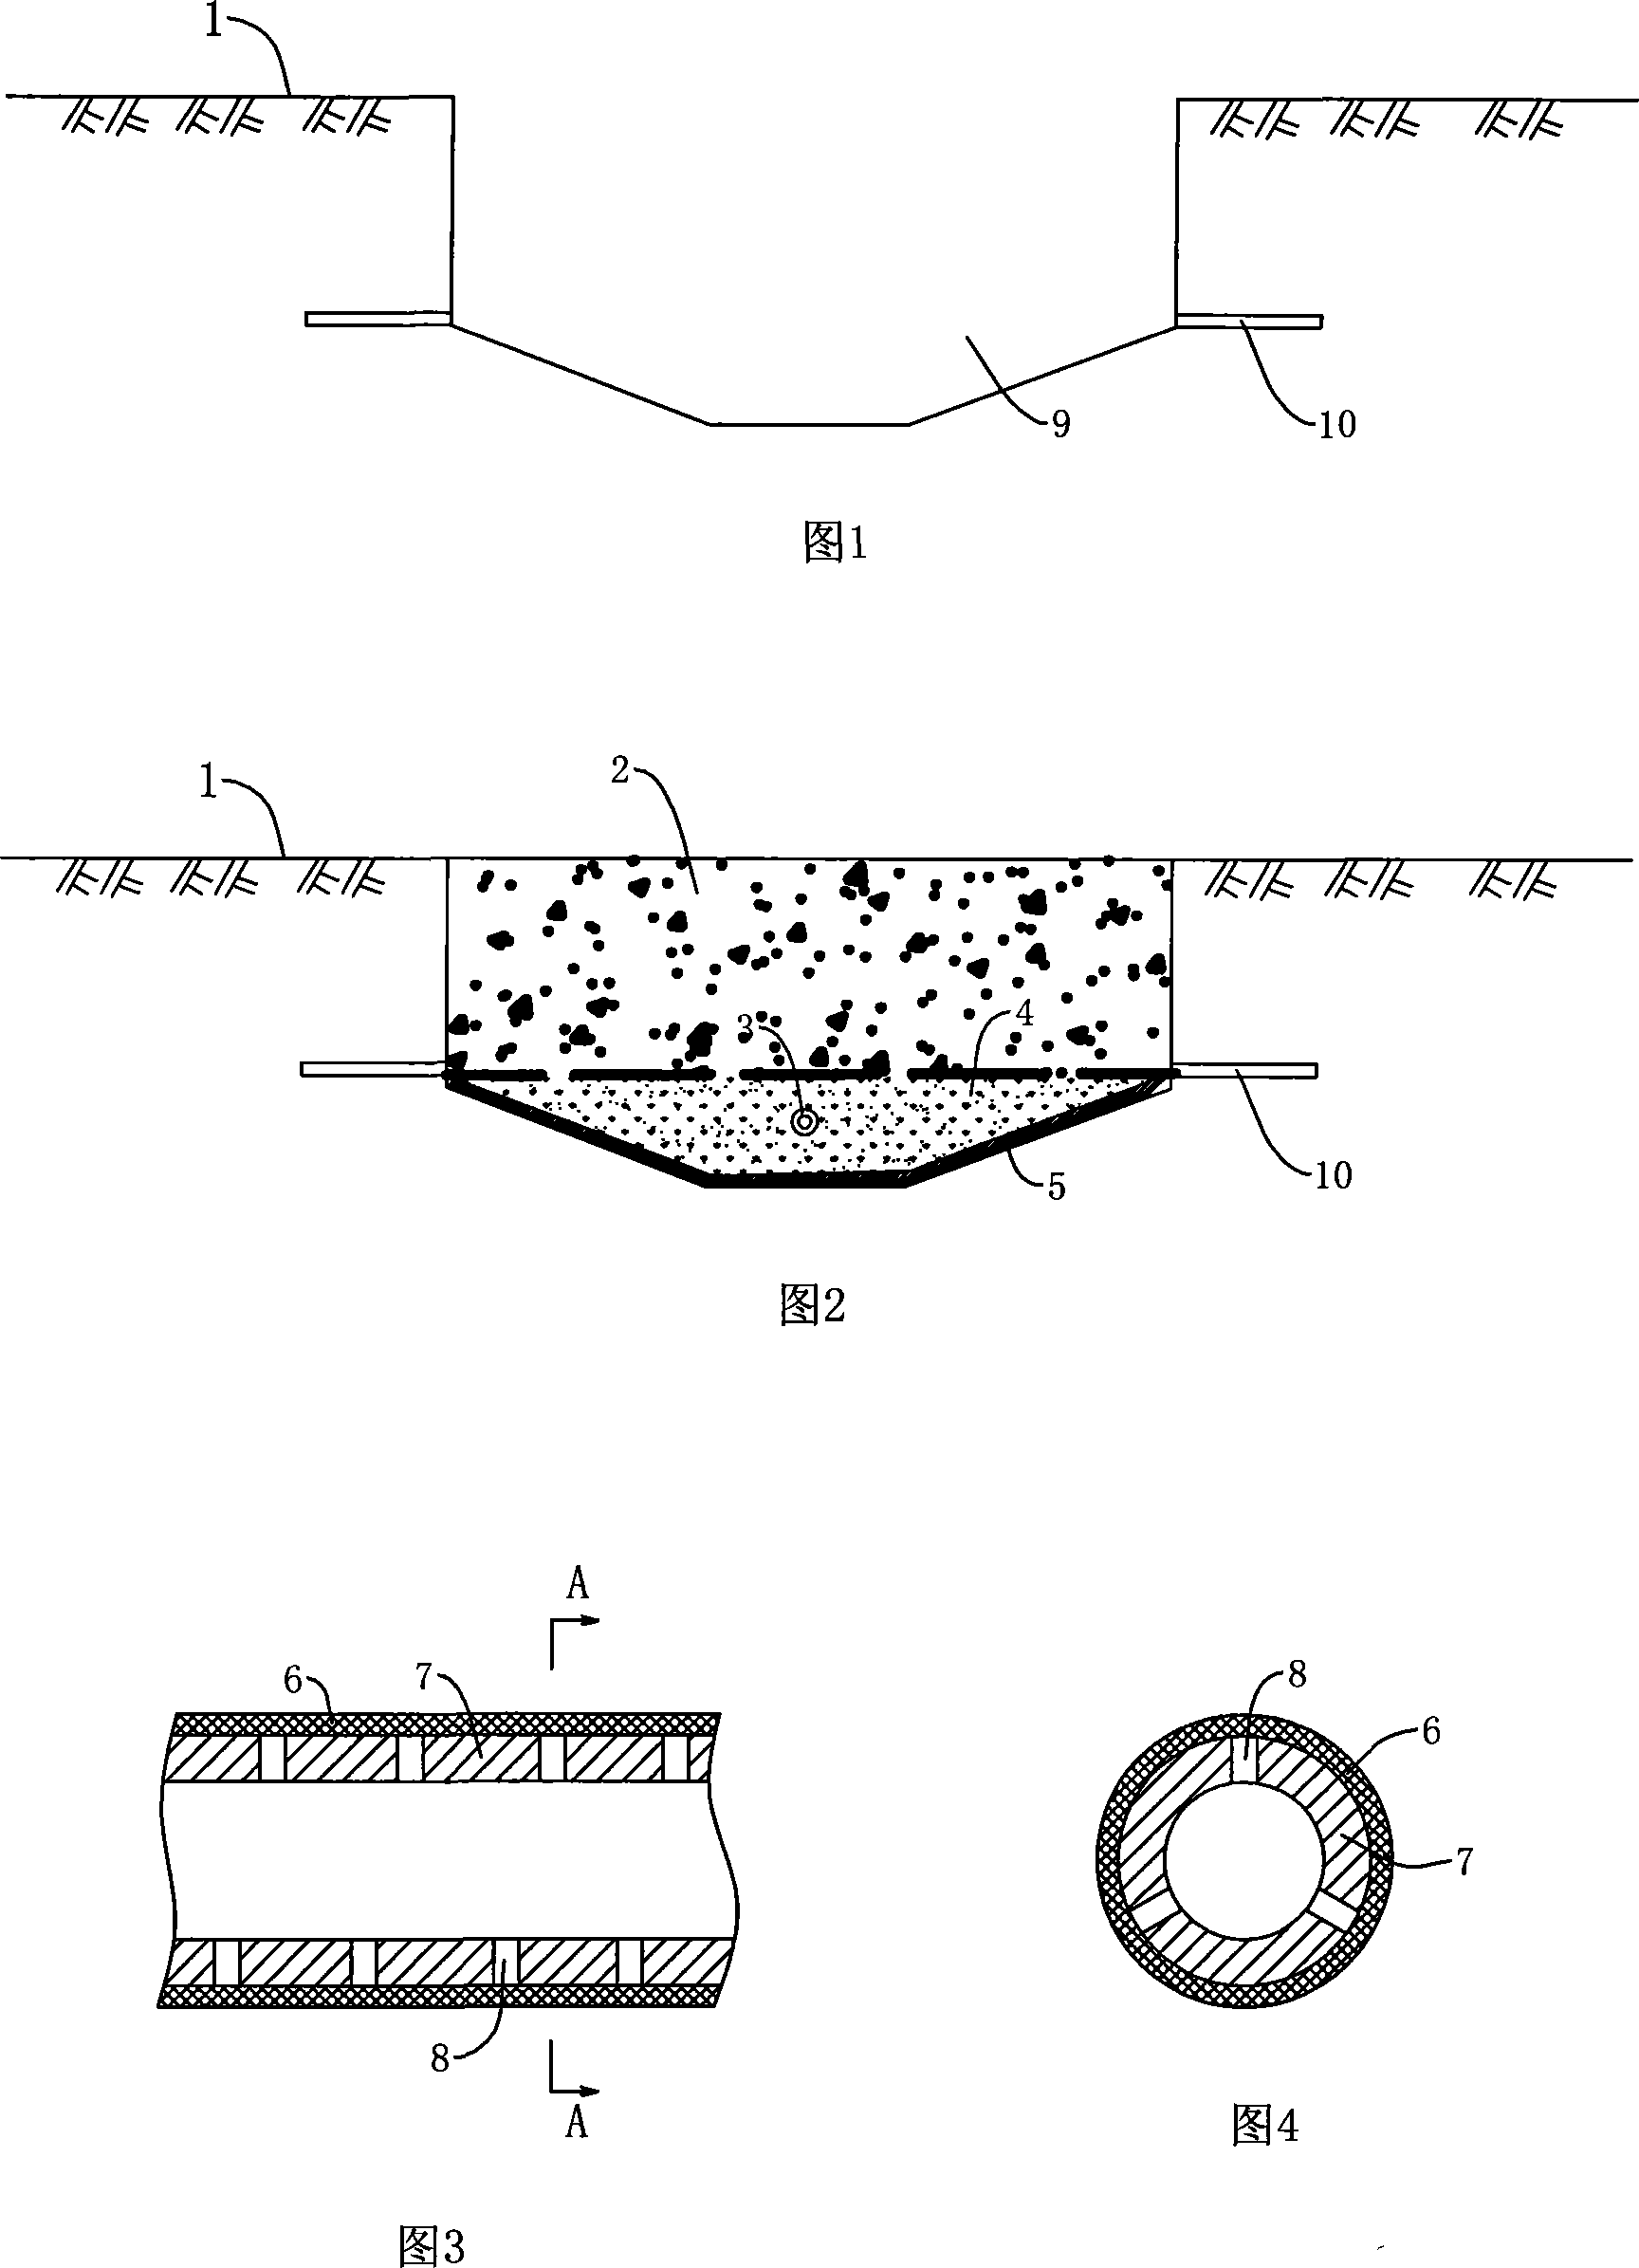 Mehtod and device for irrigating